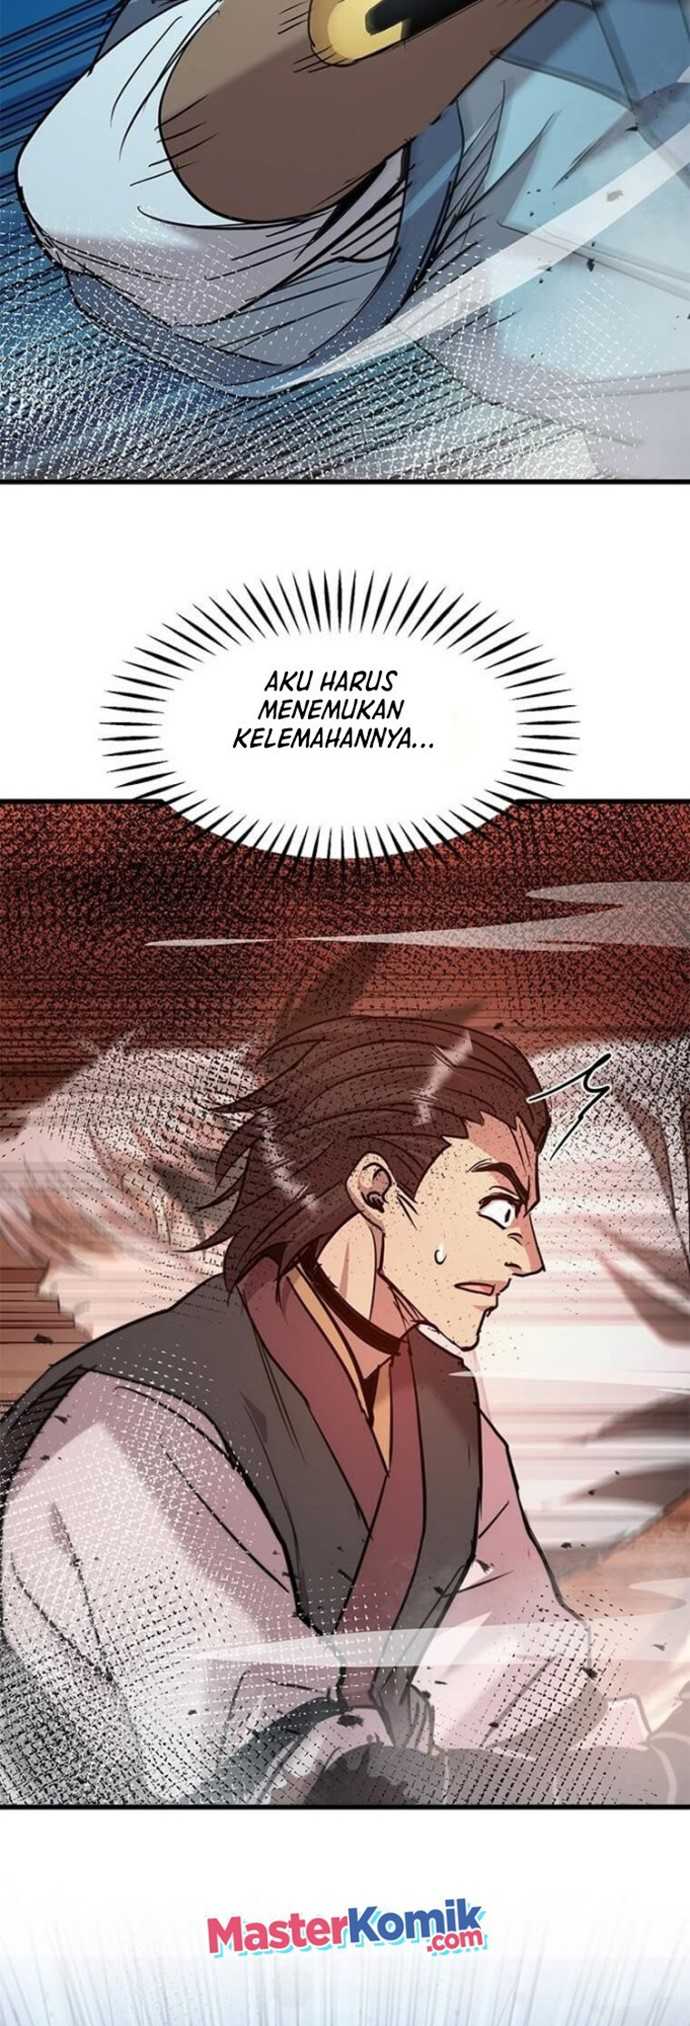 Strongest Fighter Chapter 58